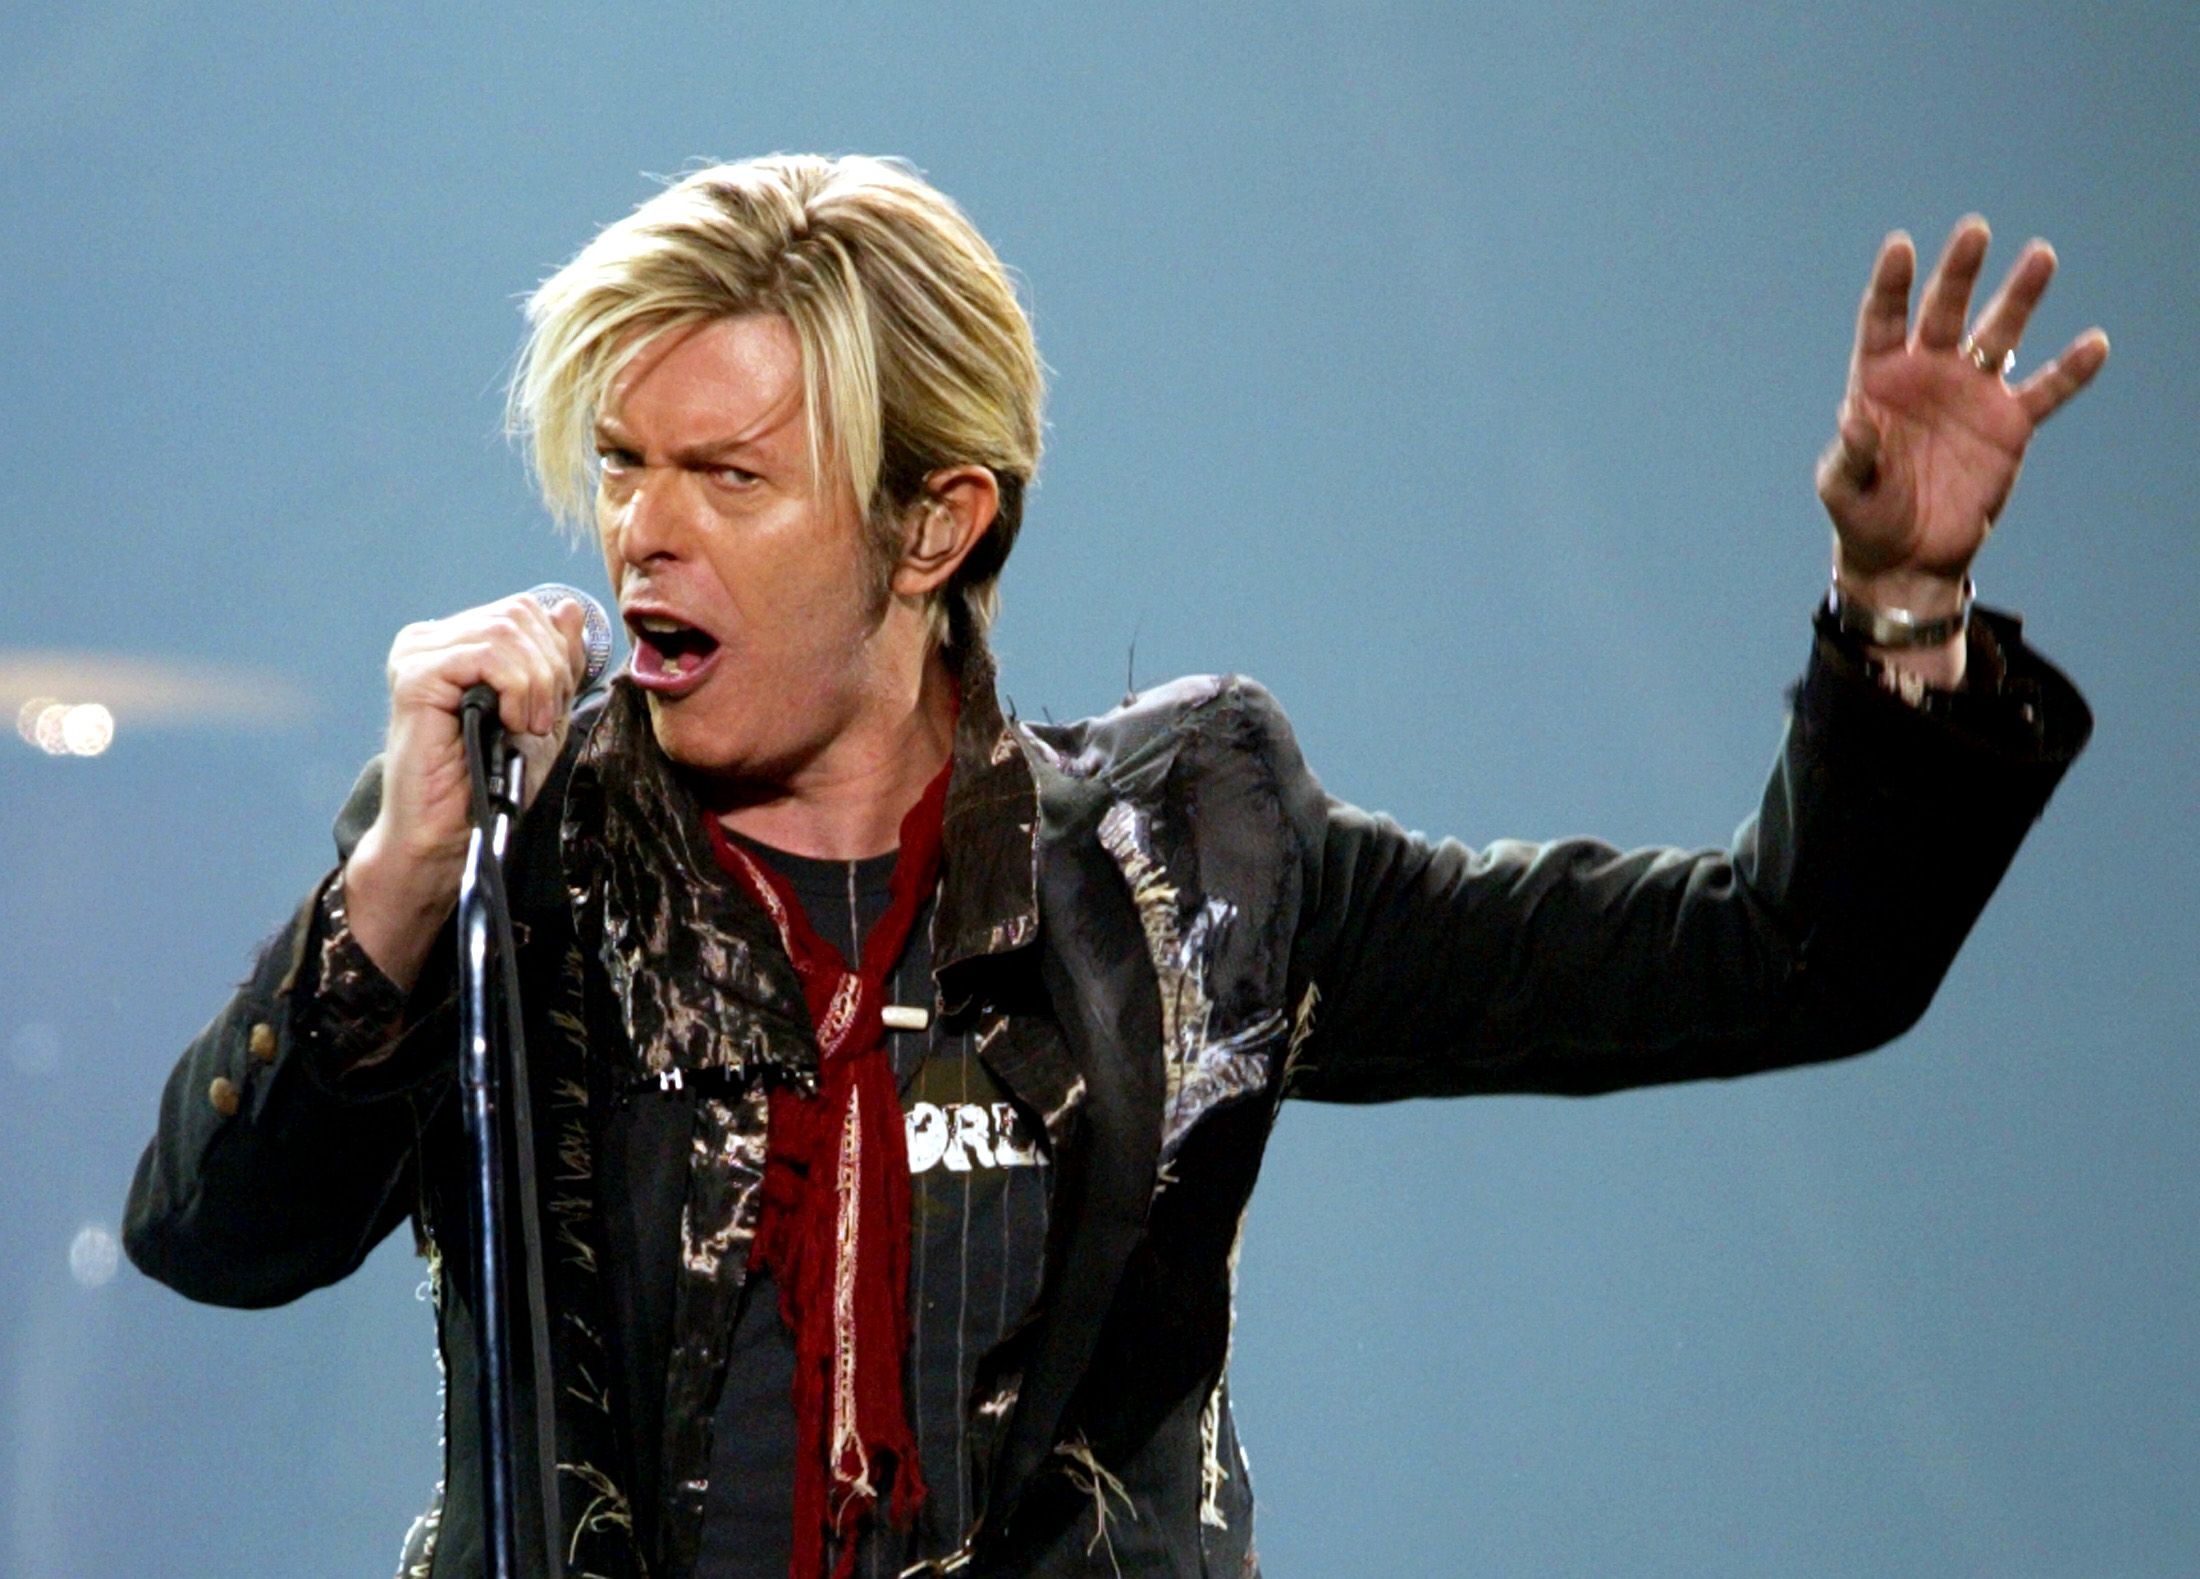 David Bowie performs his North American debut of A Reality Tour in Montreal